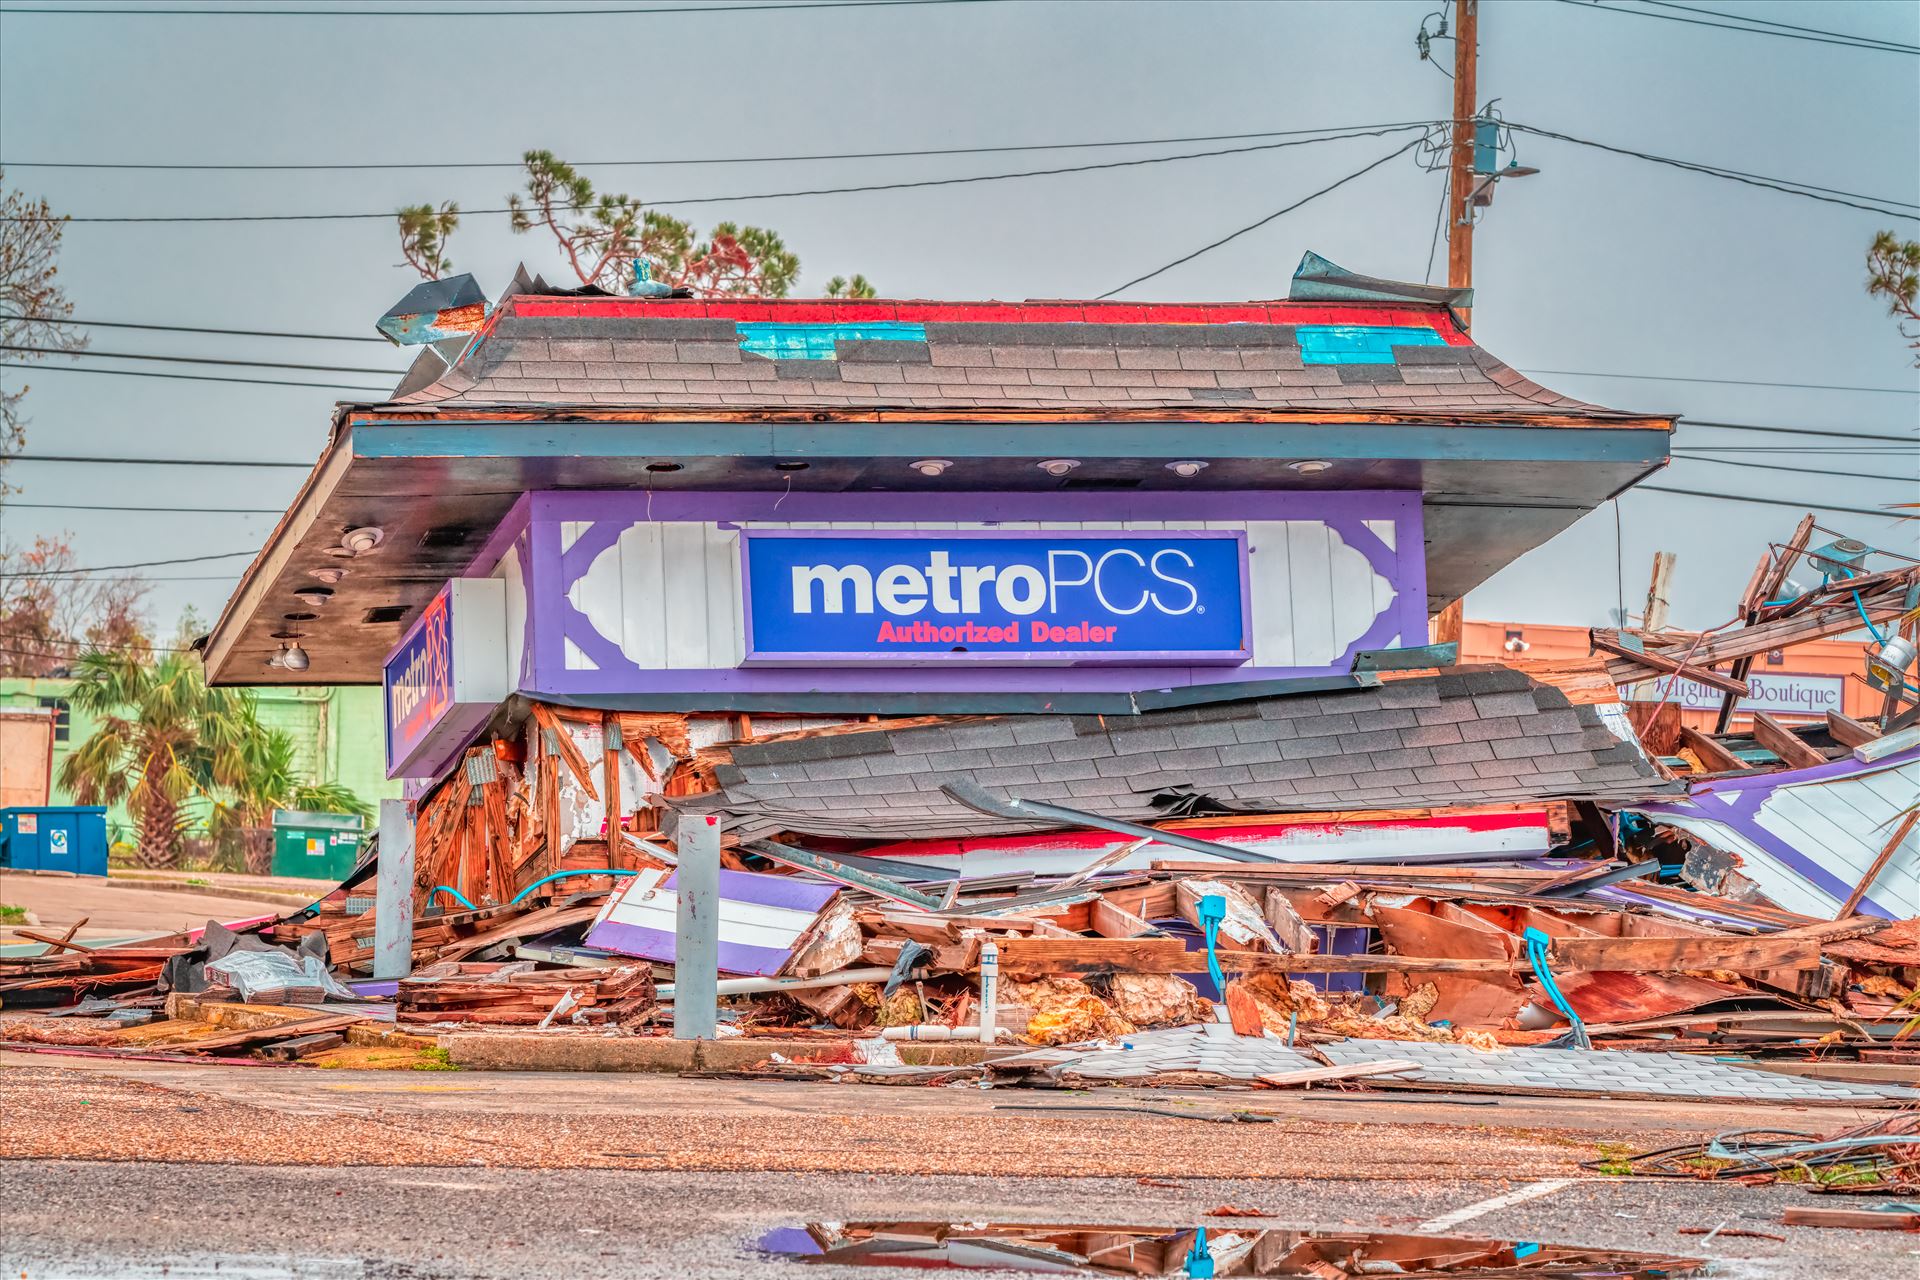 Hurricane Michael - Panama City, Florida, USA. 12/30/2018 metroPCS destroyed by Hurricane Michael by Terry Kelly Photography